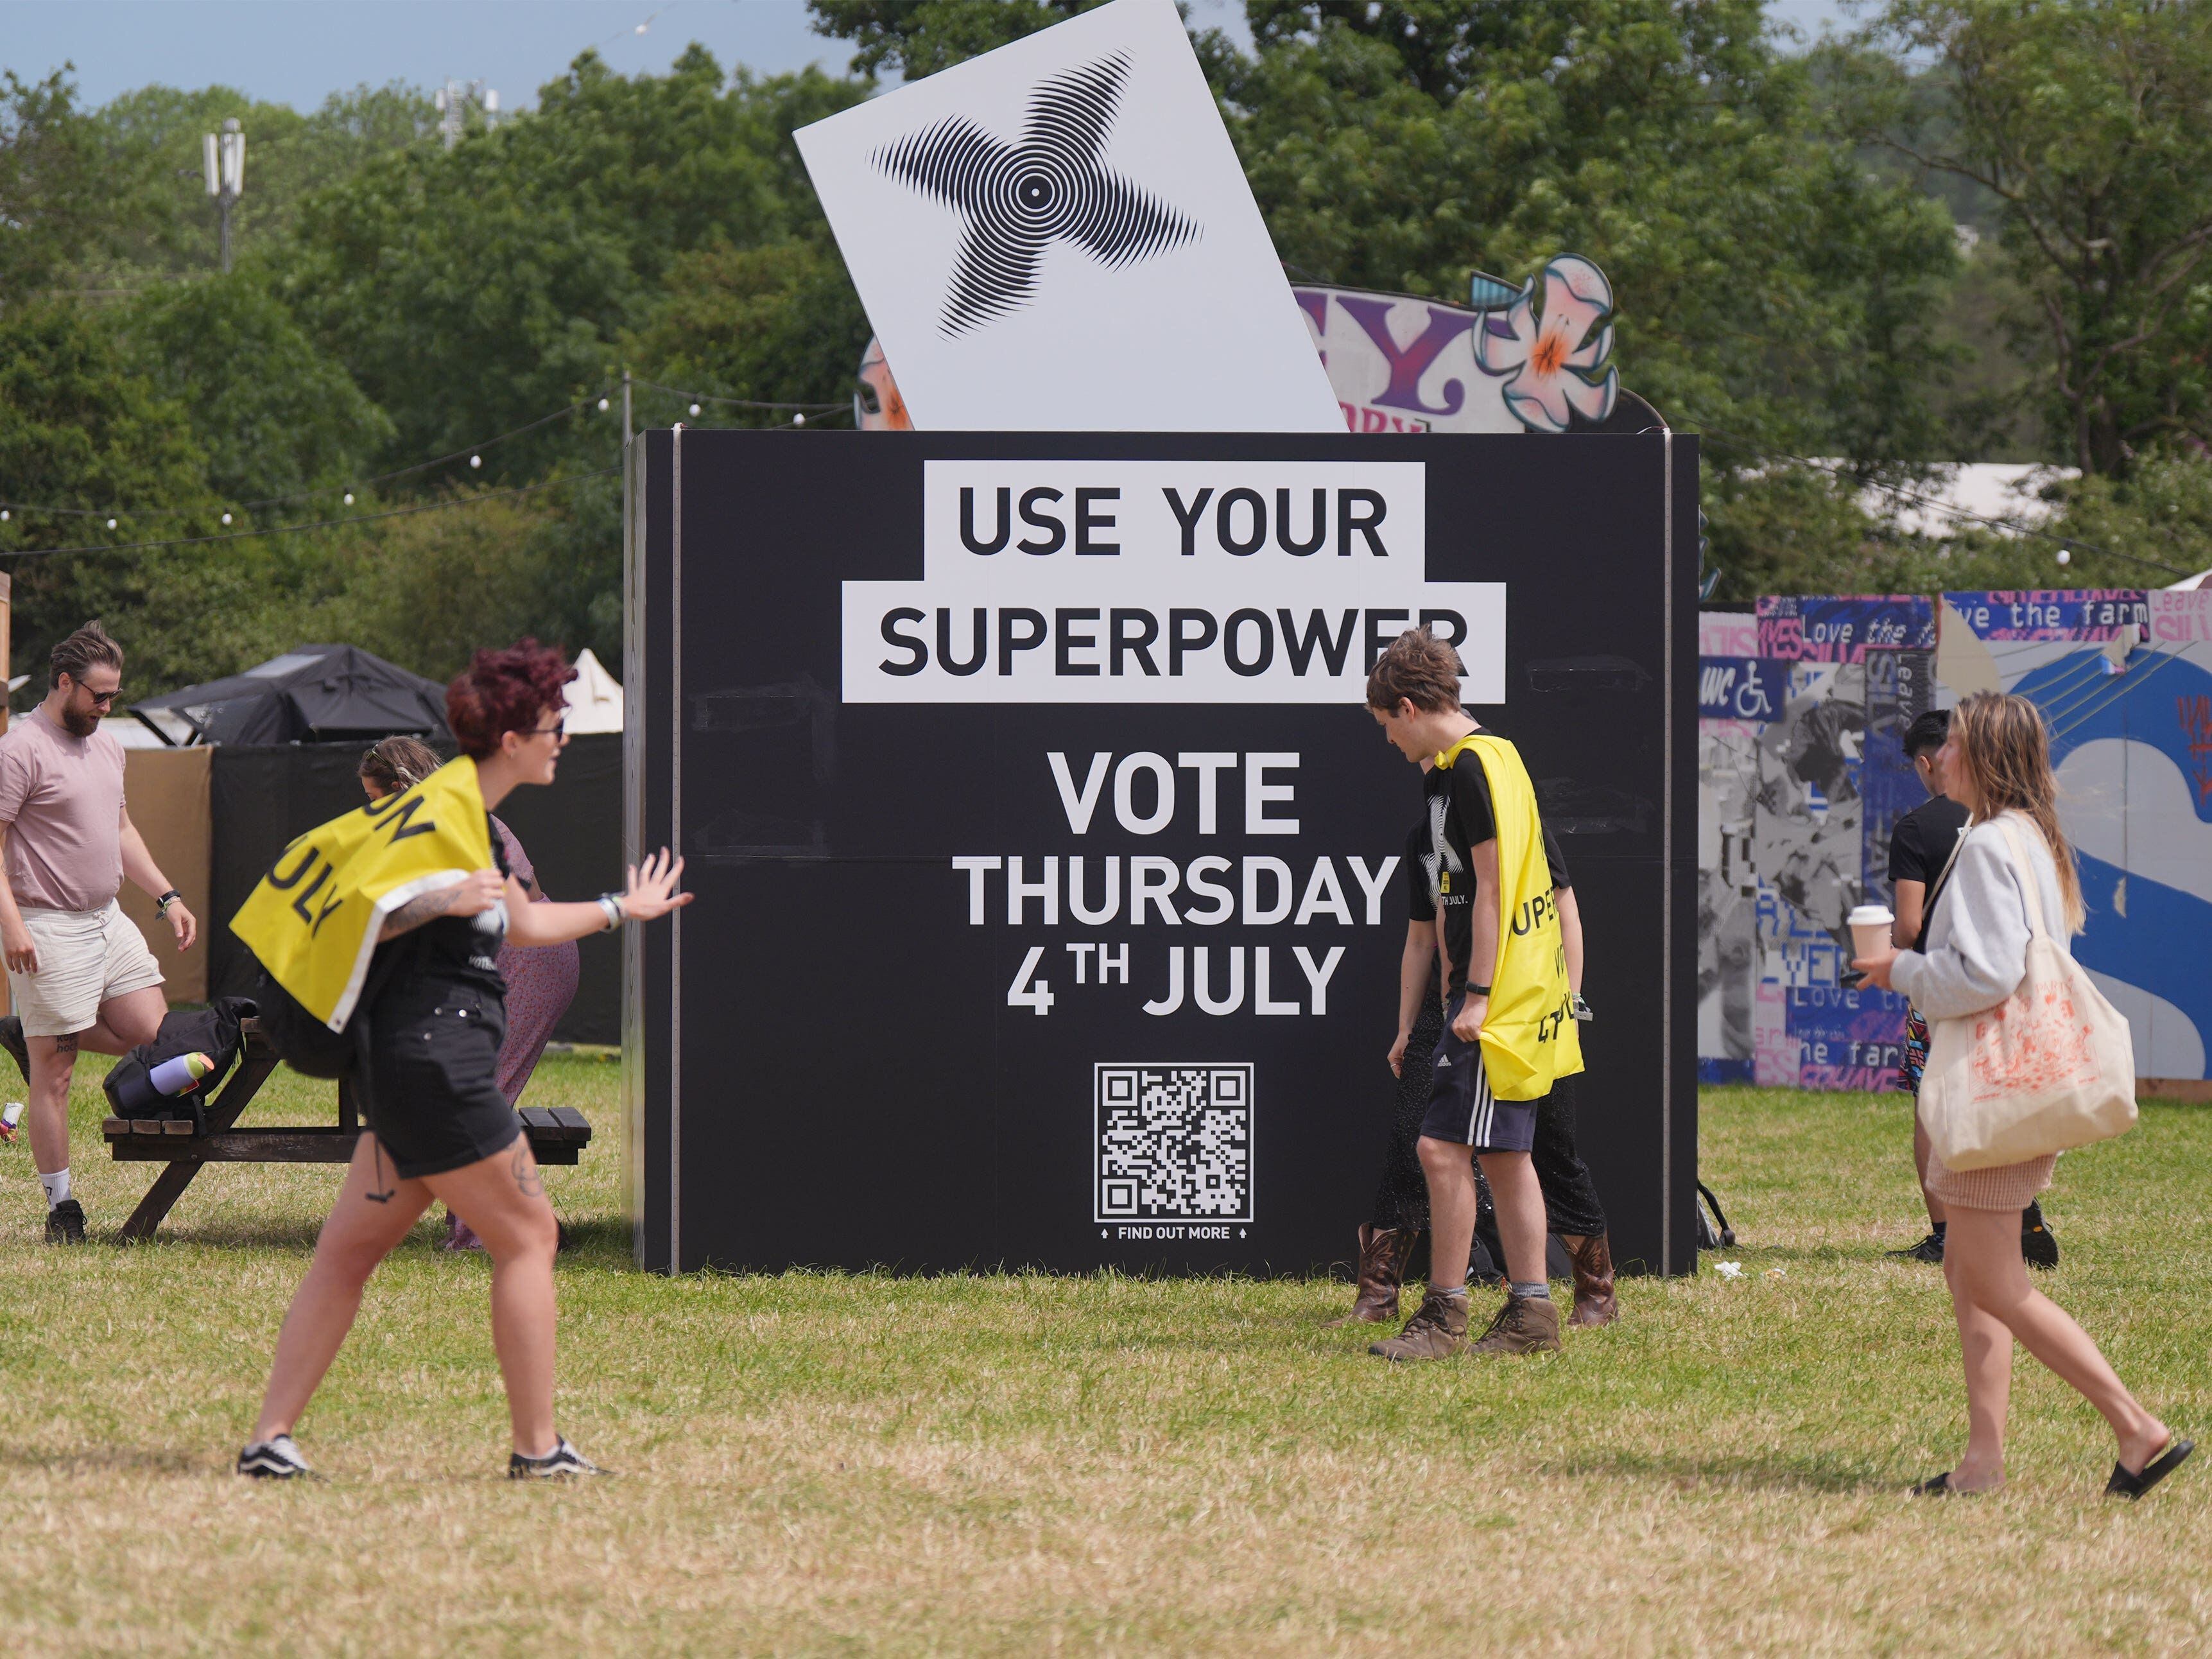 Just Vote: Glastonbury ‘politically charged’ in week before General Election